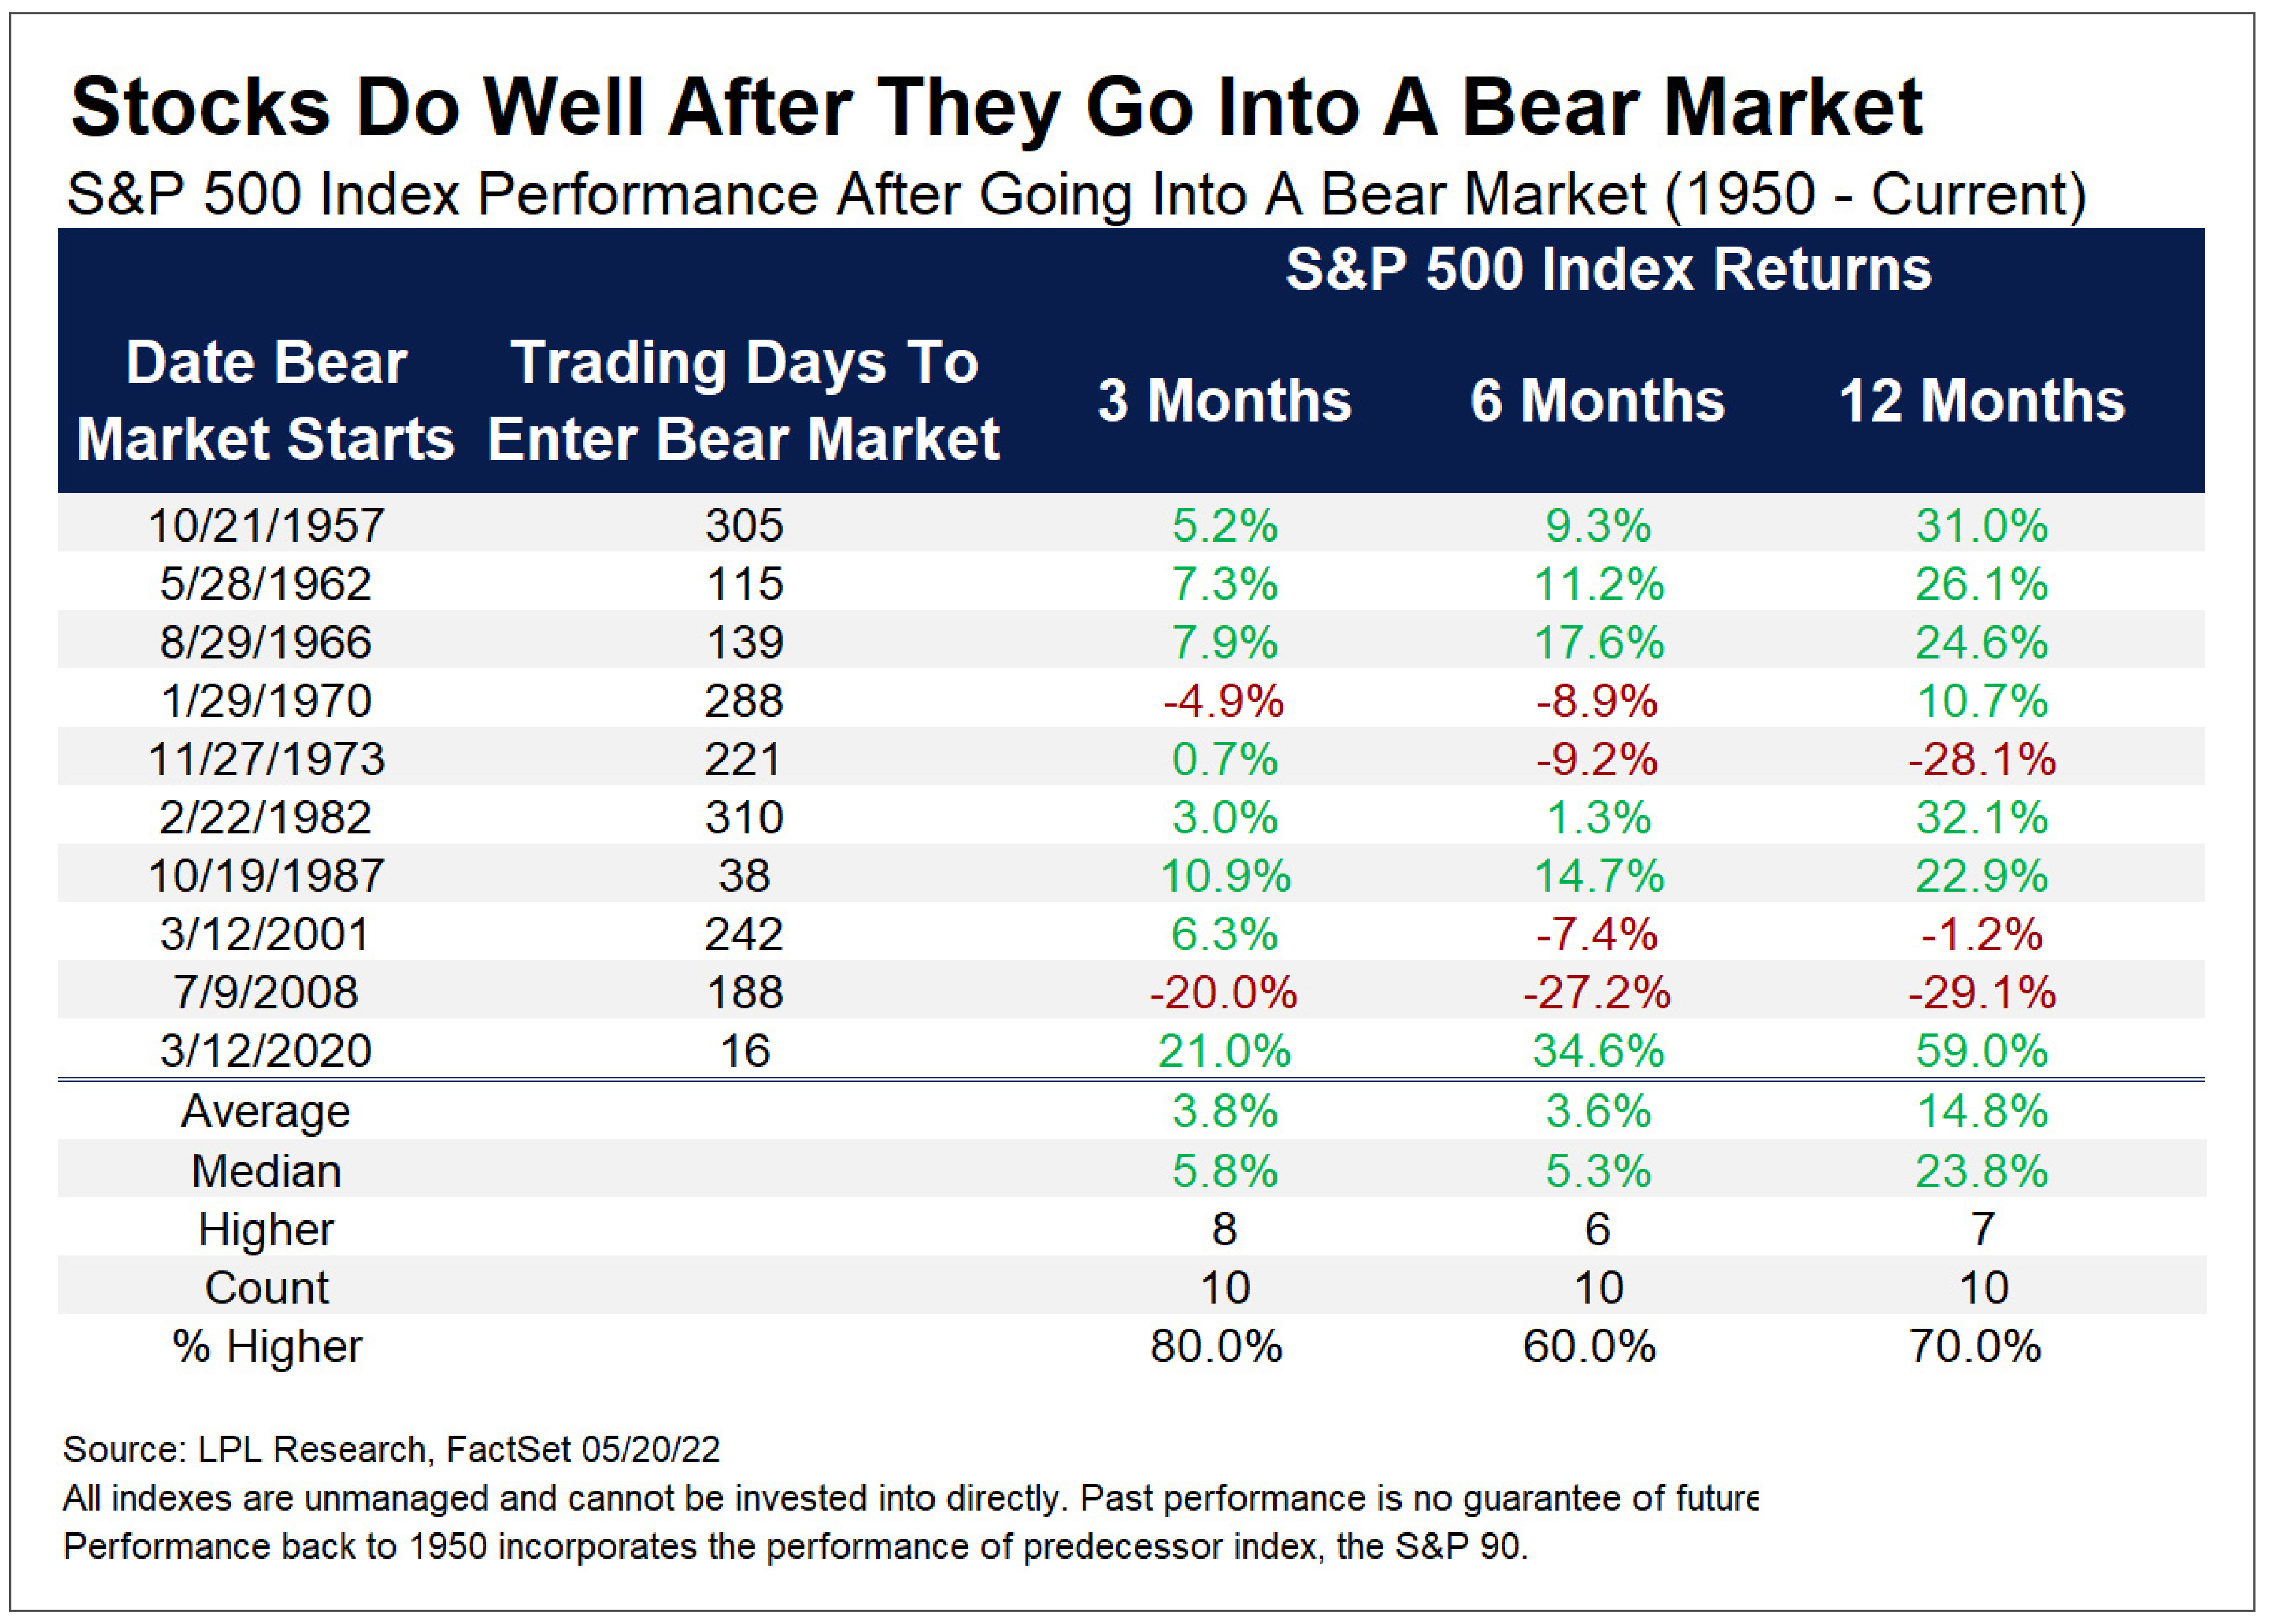 Stocks Do Well After They Go Into Bear Market graphic